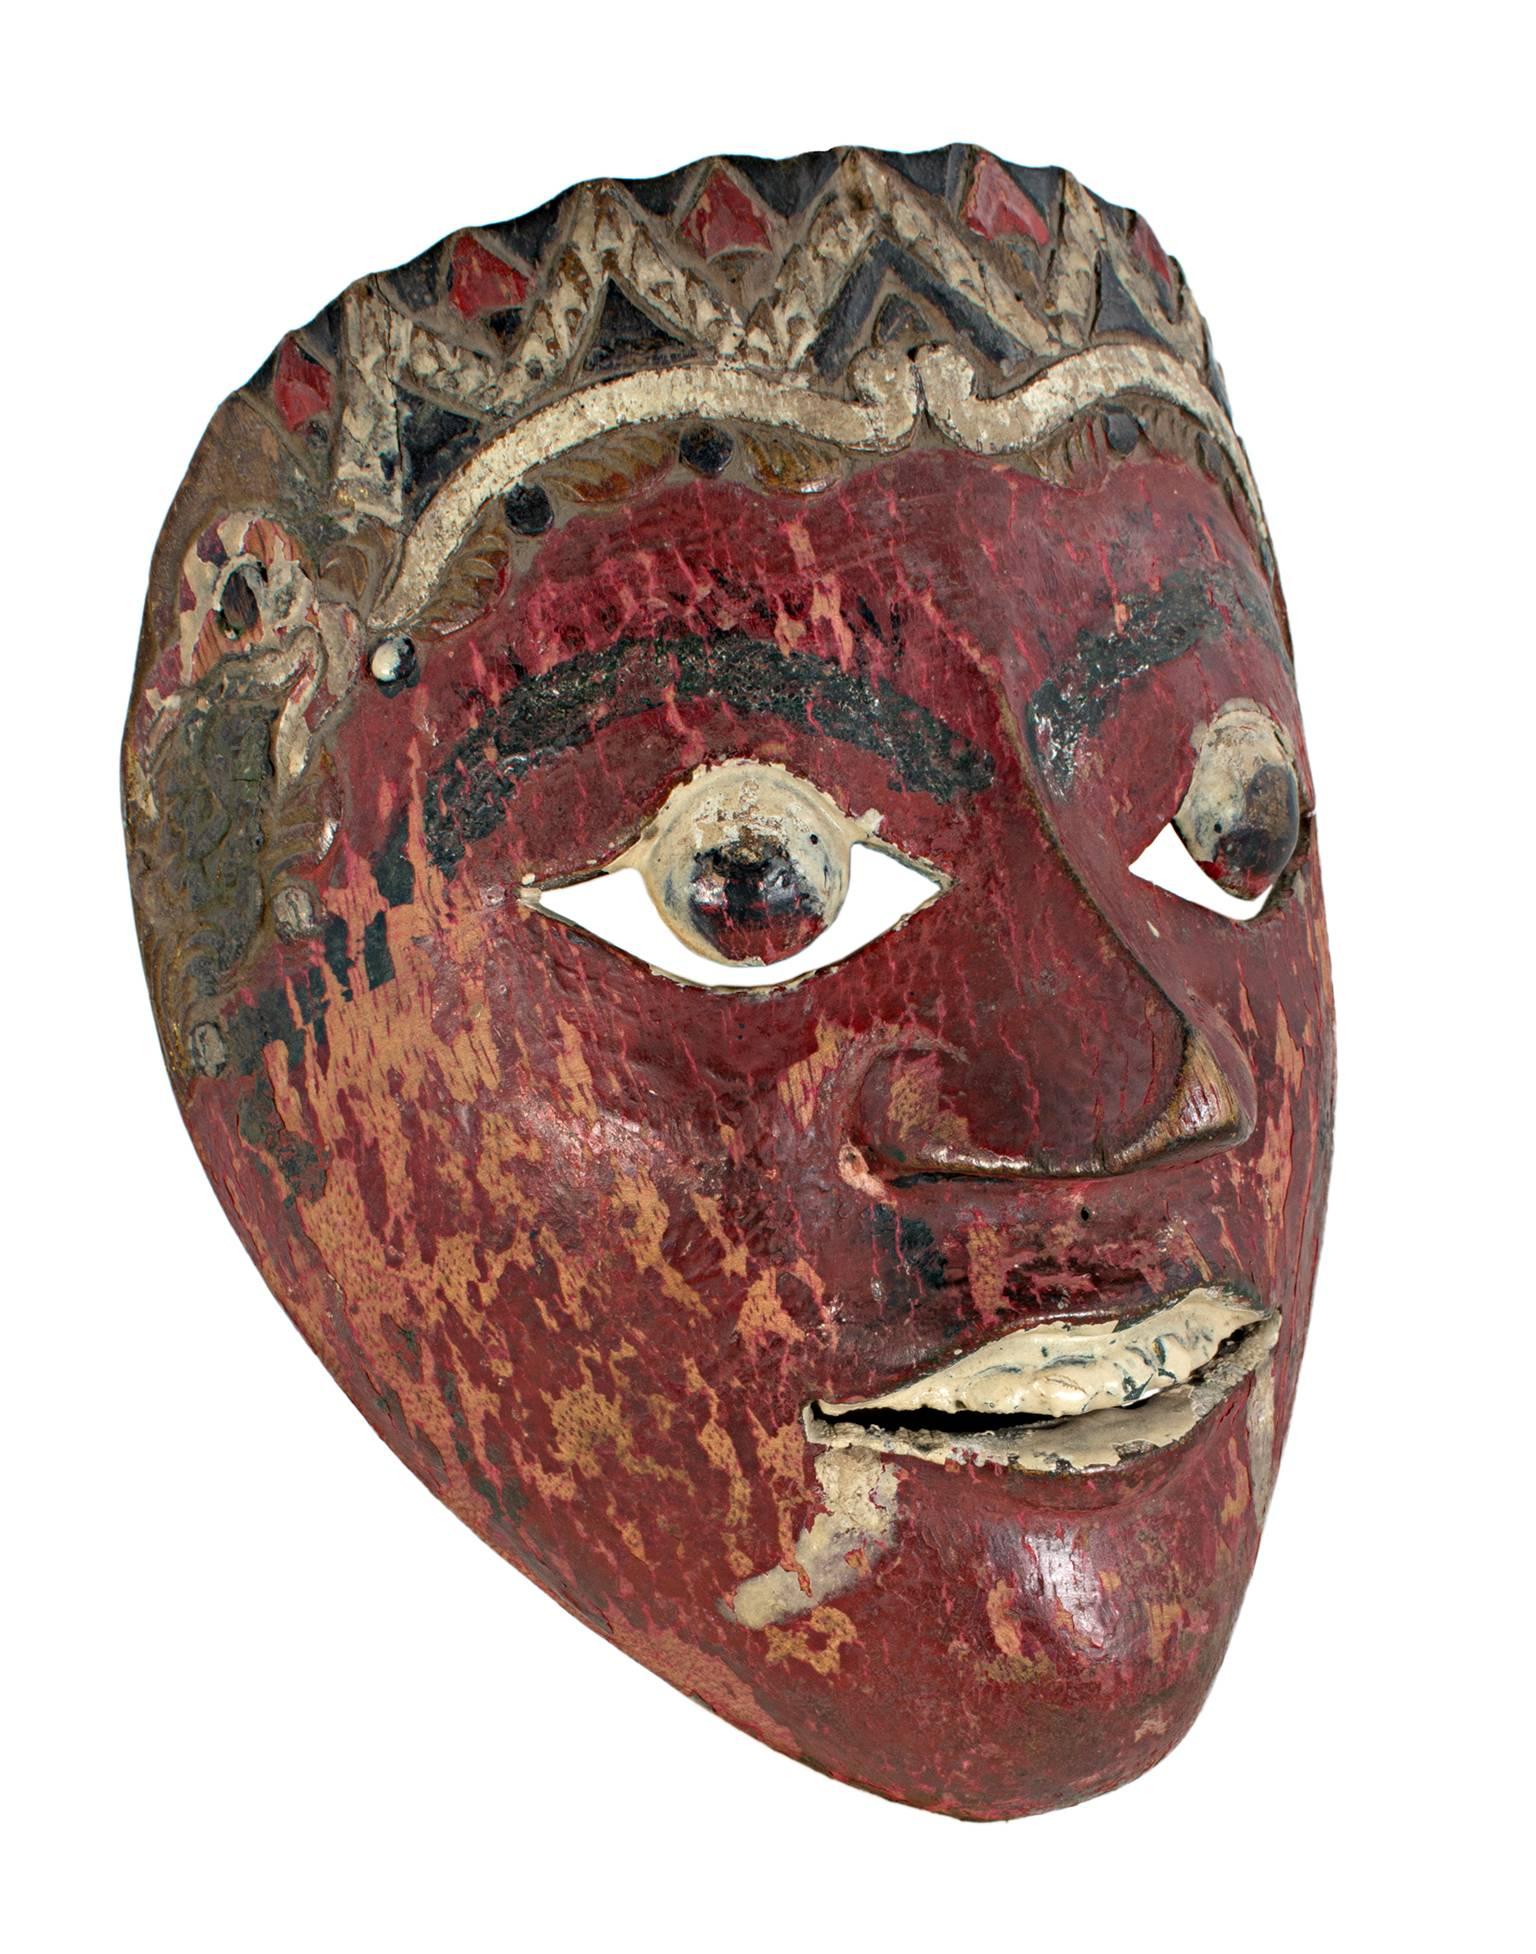 "Mask with Round Eyes, Painted Fangs, and Blood Red Face, " Wood from Indonesia - Sculpture by Unknown